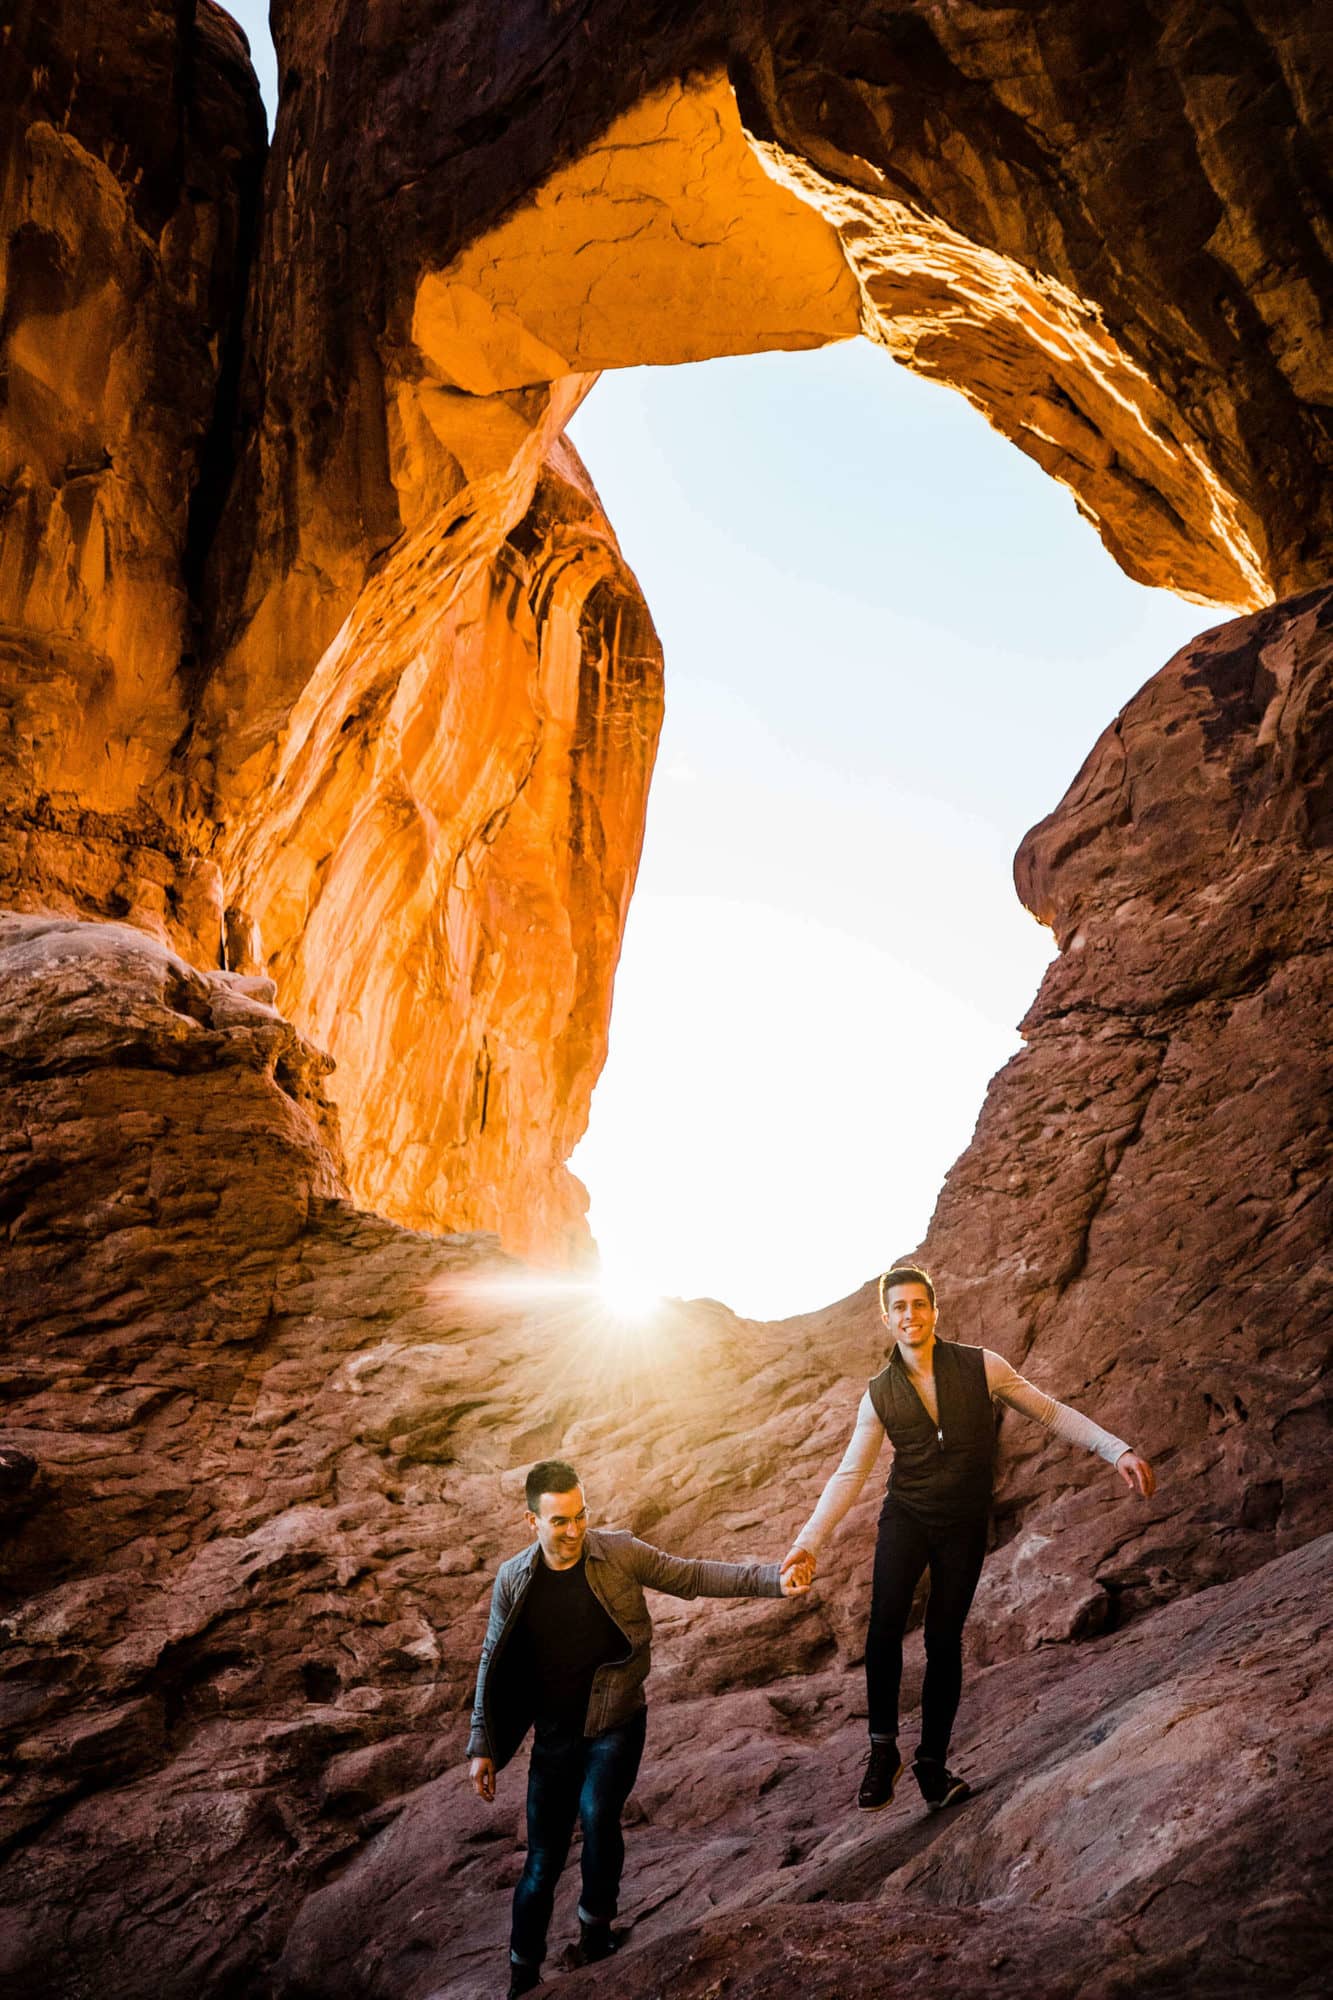 You have to consider these six epic places to elope in Utah! If you love the desert vibes and are curious where you could tie the knot read this.